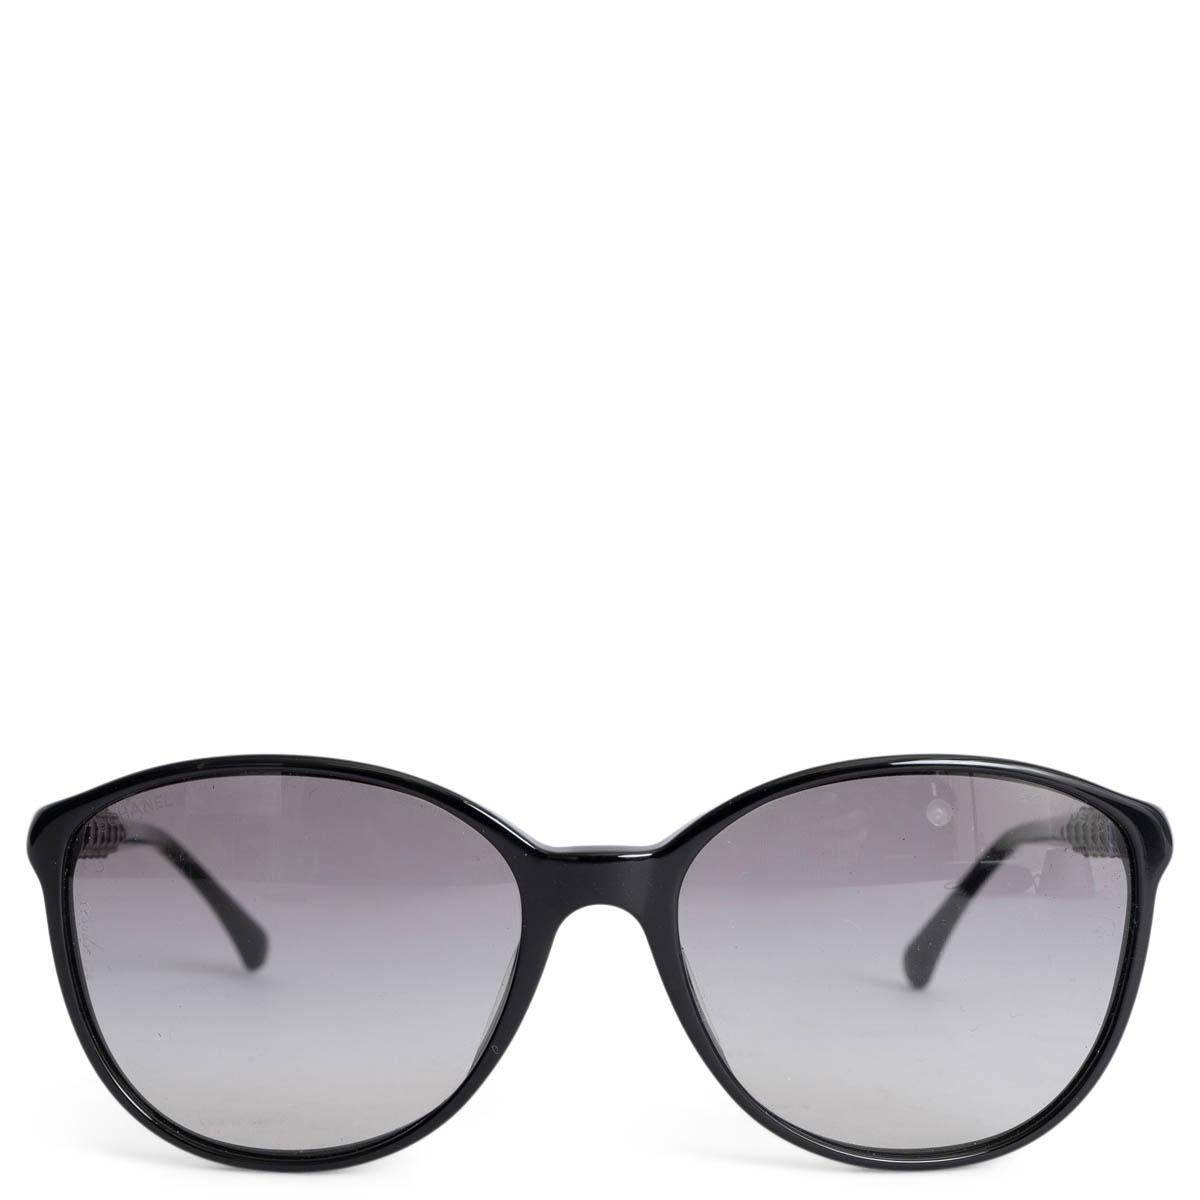 CHANEL black acetate STUDDED CAT-EYE Sunglasses 5207-A For Sale